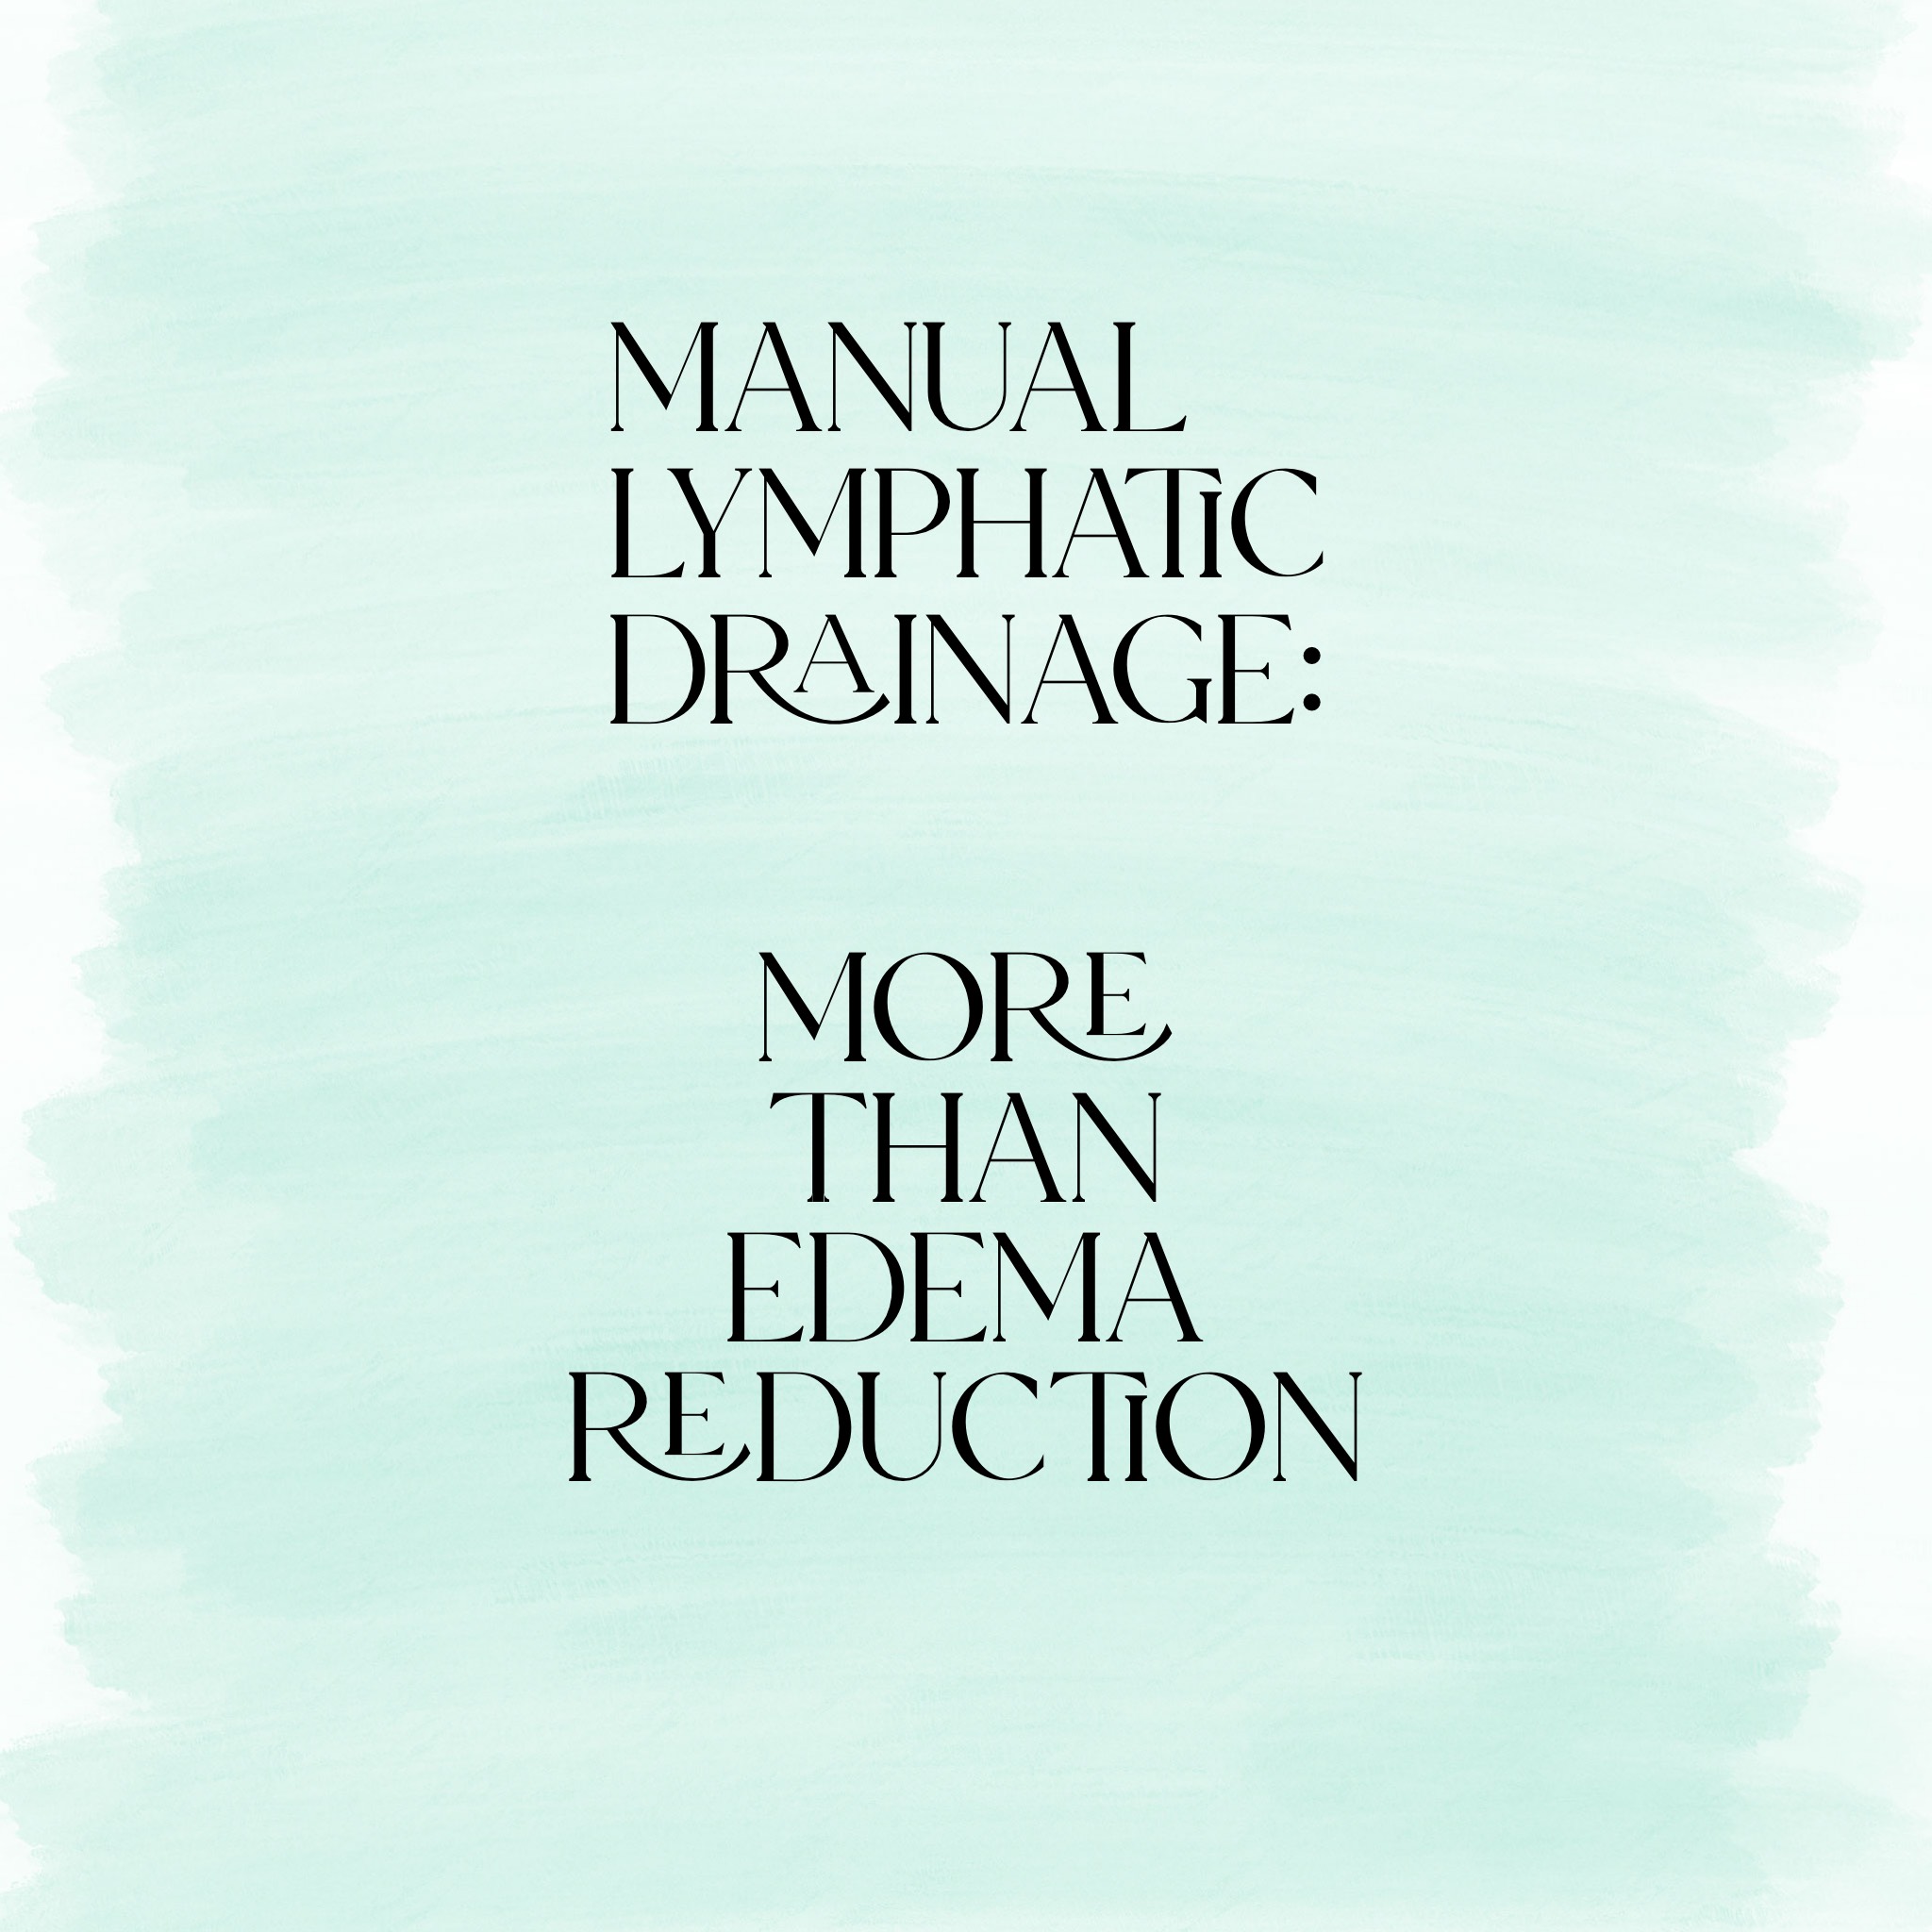 Manual lymphatic drainage - more than edema reduction